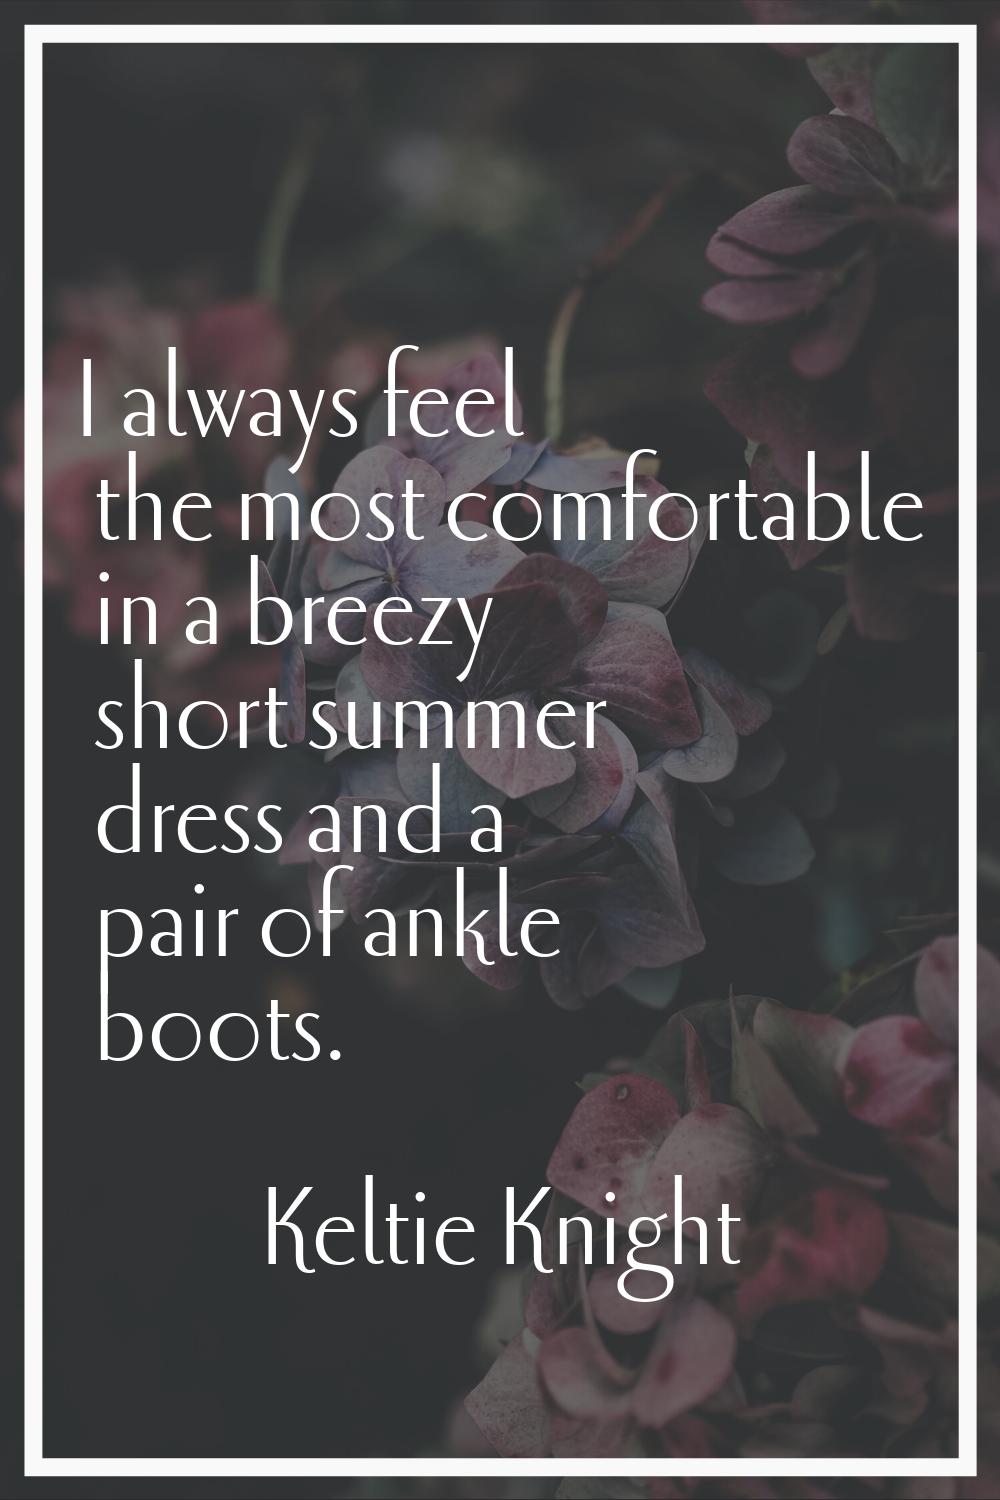 I always feel the most comfortable in a breezy short summer dress and a pair of ankle boots.